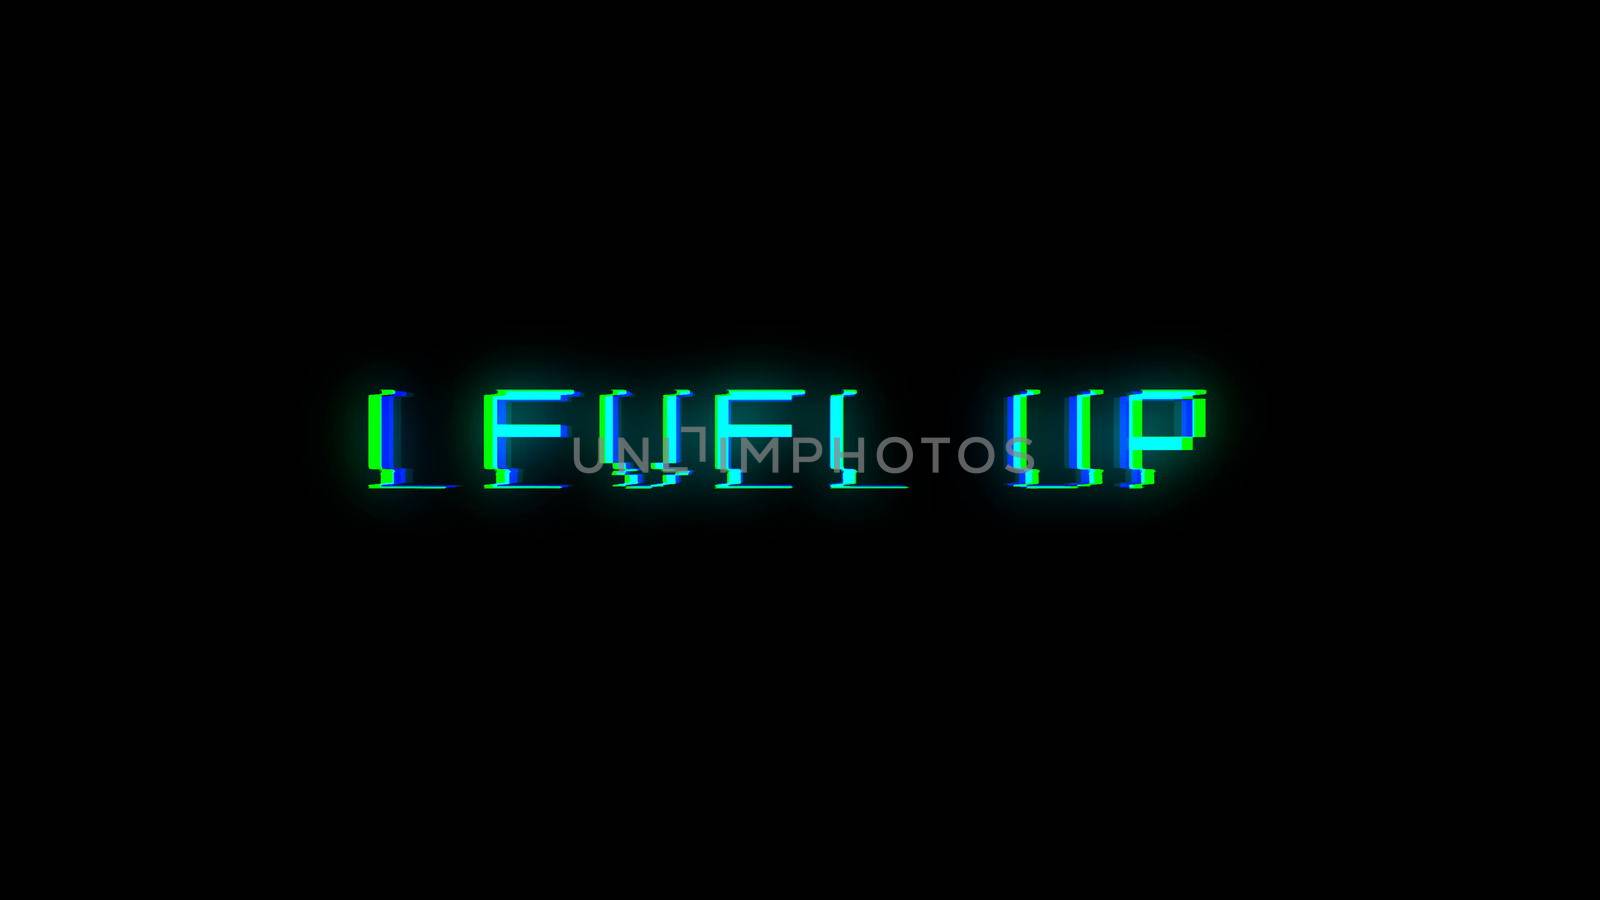 Level UP text with bad signal. Glitch effect. 3d rendering